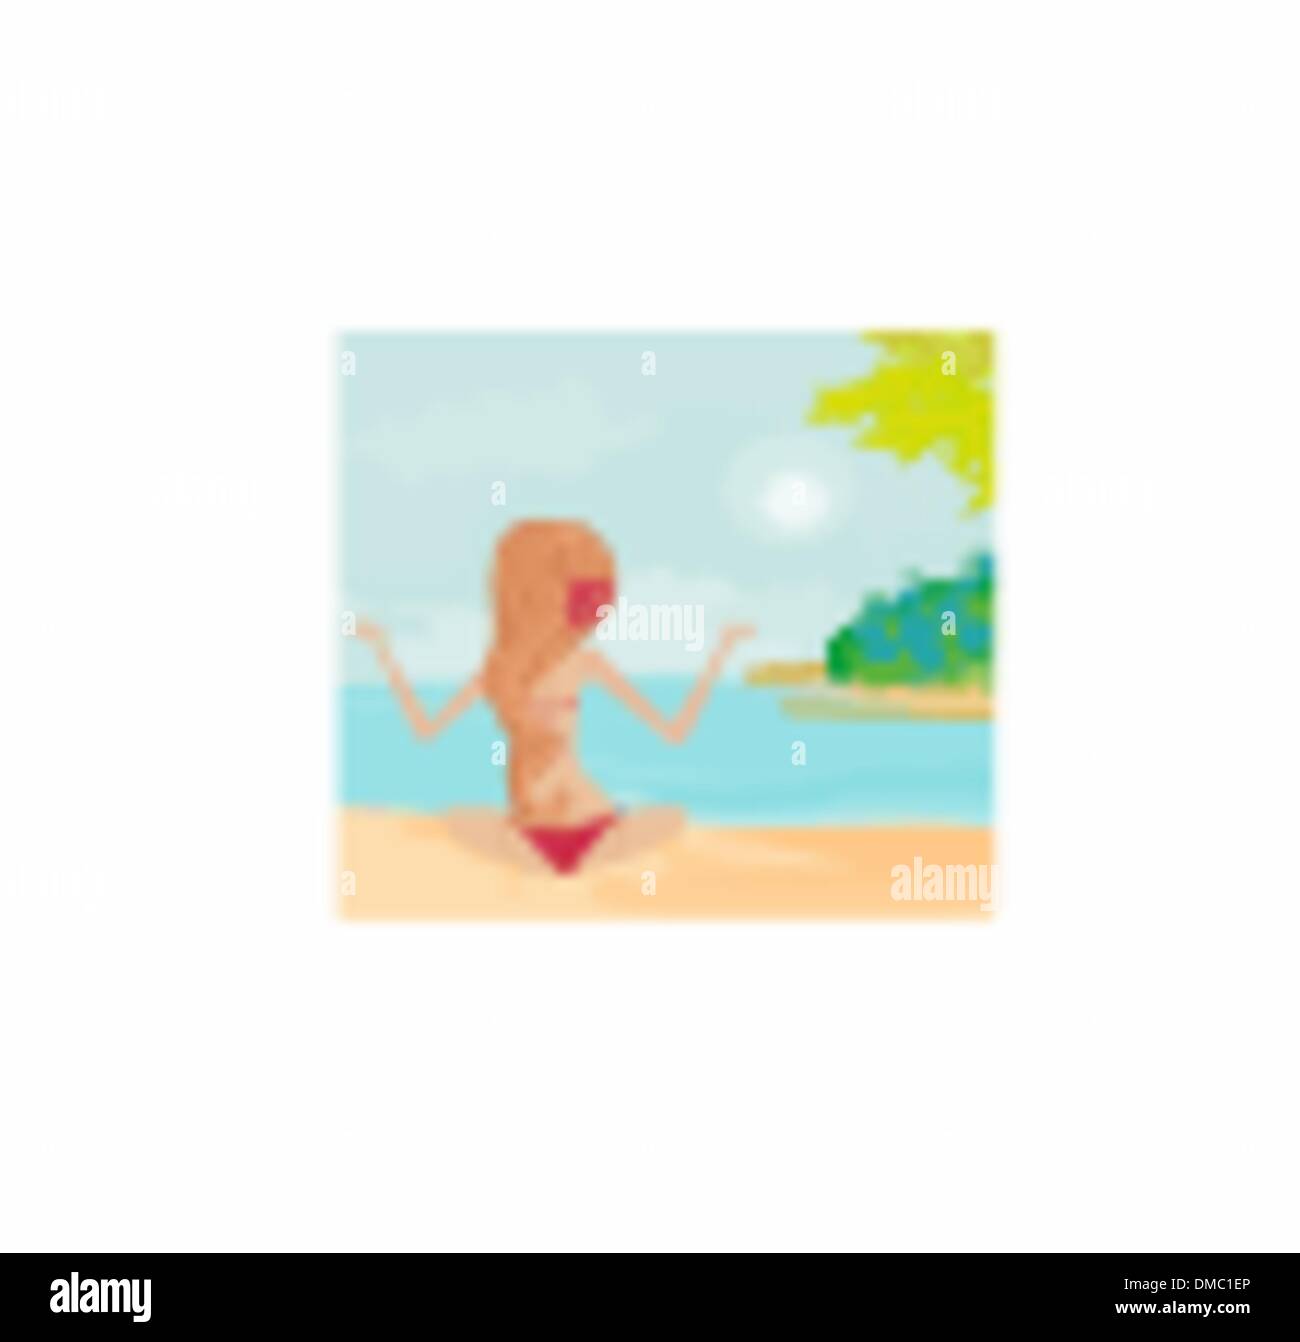 Girl in Yoga pose on Summer background with palm tree Stock Vector